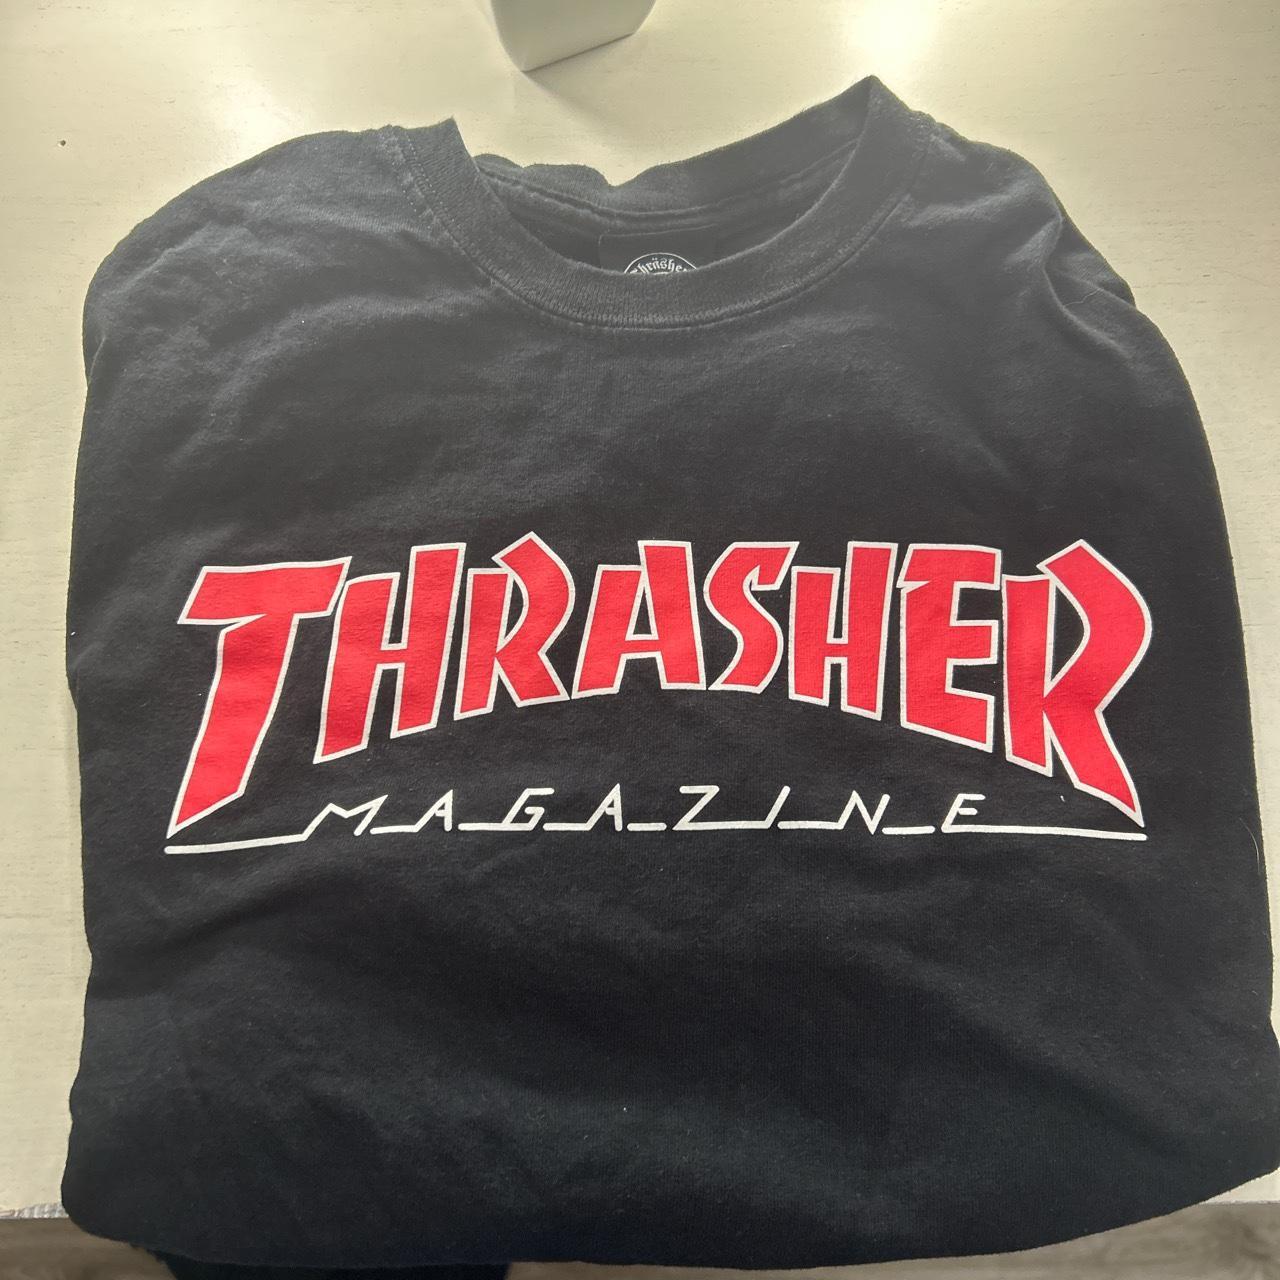 Thrasher Men's Grey and Red T-shirt